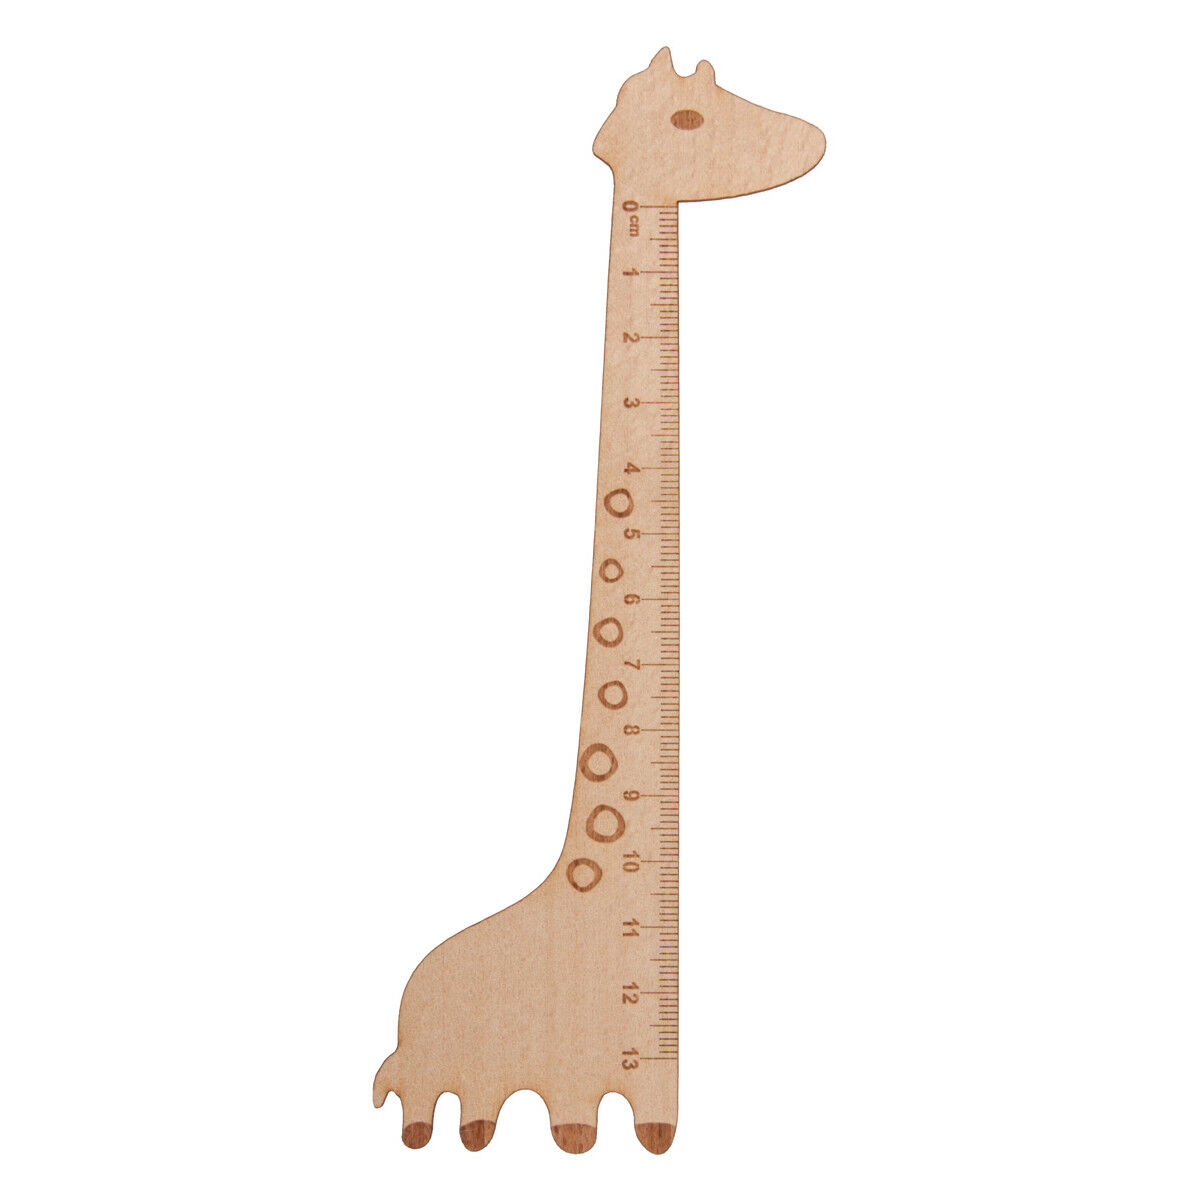 Fun-shaped wooden ruler for kids